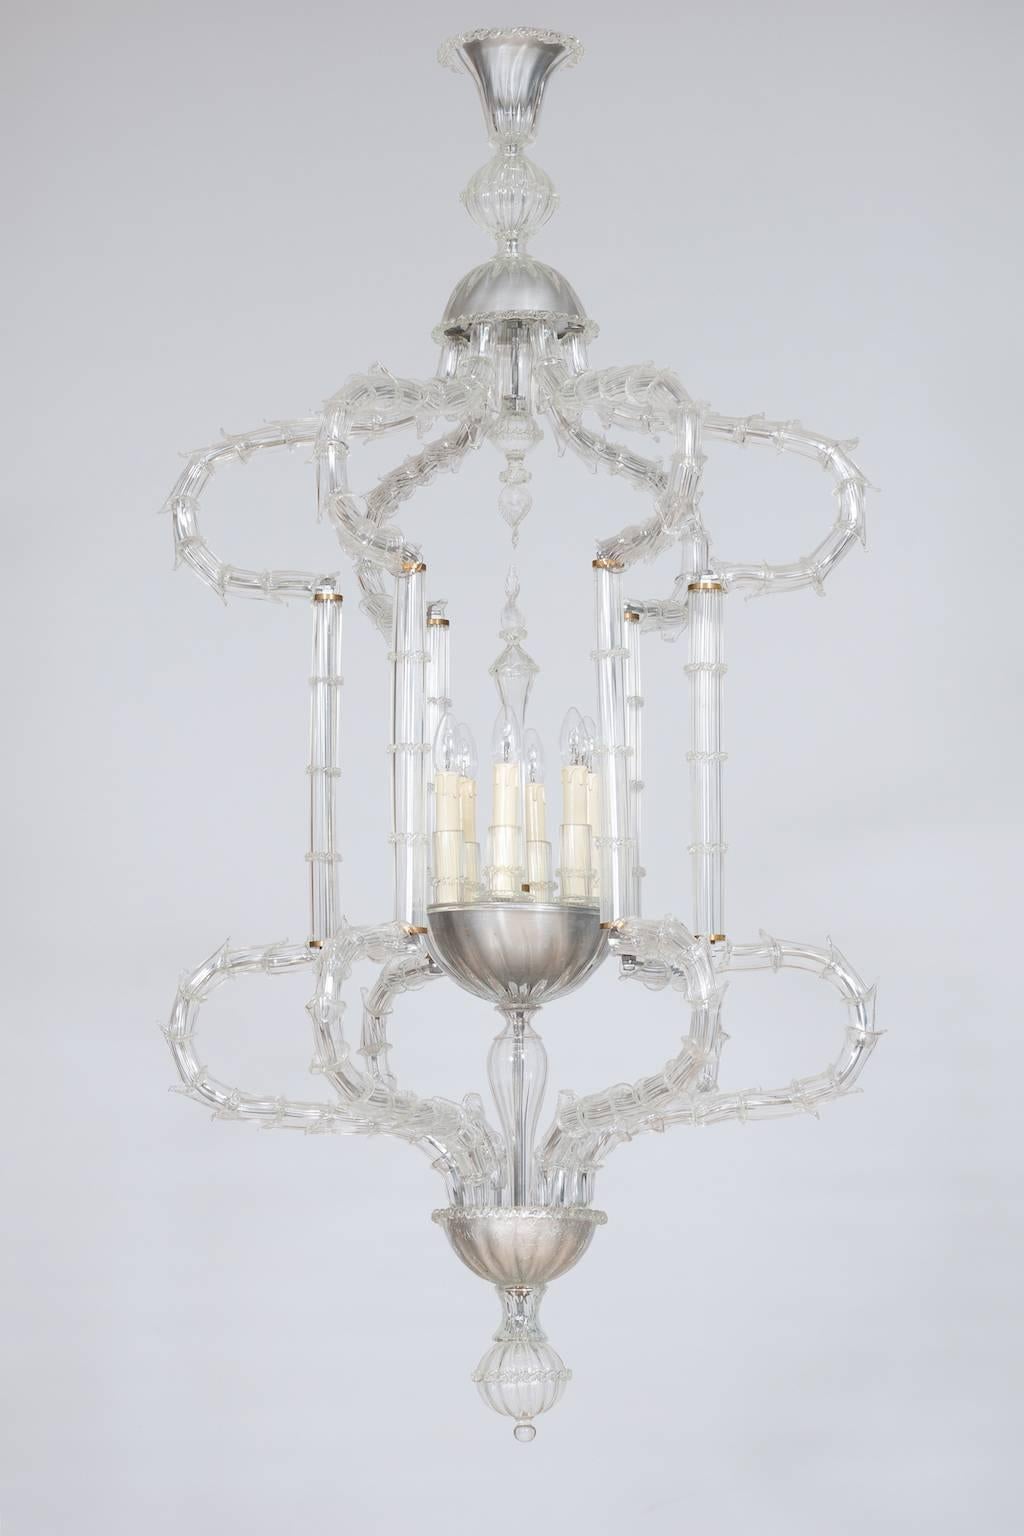 Elegant flushmount in blown Murano glass clear color, Giovanni Dalla Fina 1980s.
This is a finest flush mounts in Ca' Rezzonico style, composed by a series of Murano glass elements allocated along an elegant framework that in the end generates the